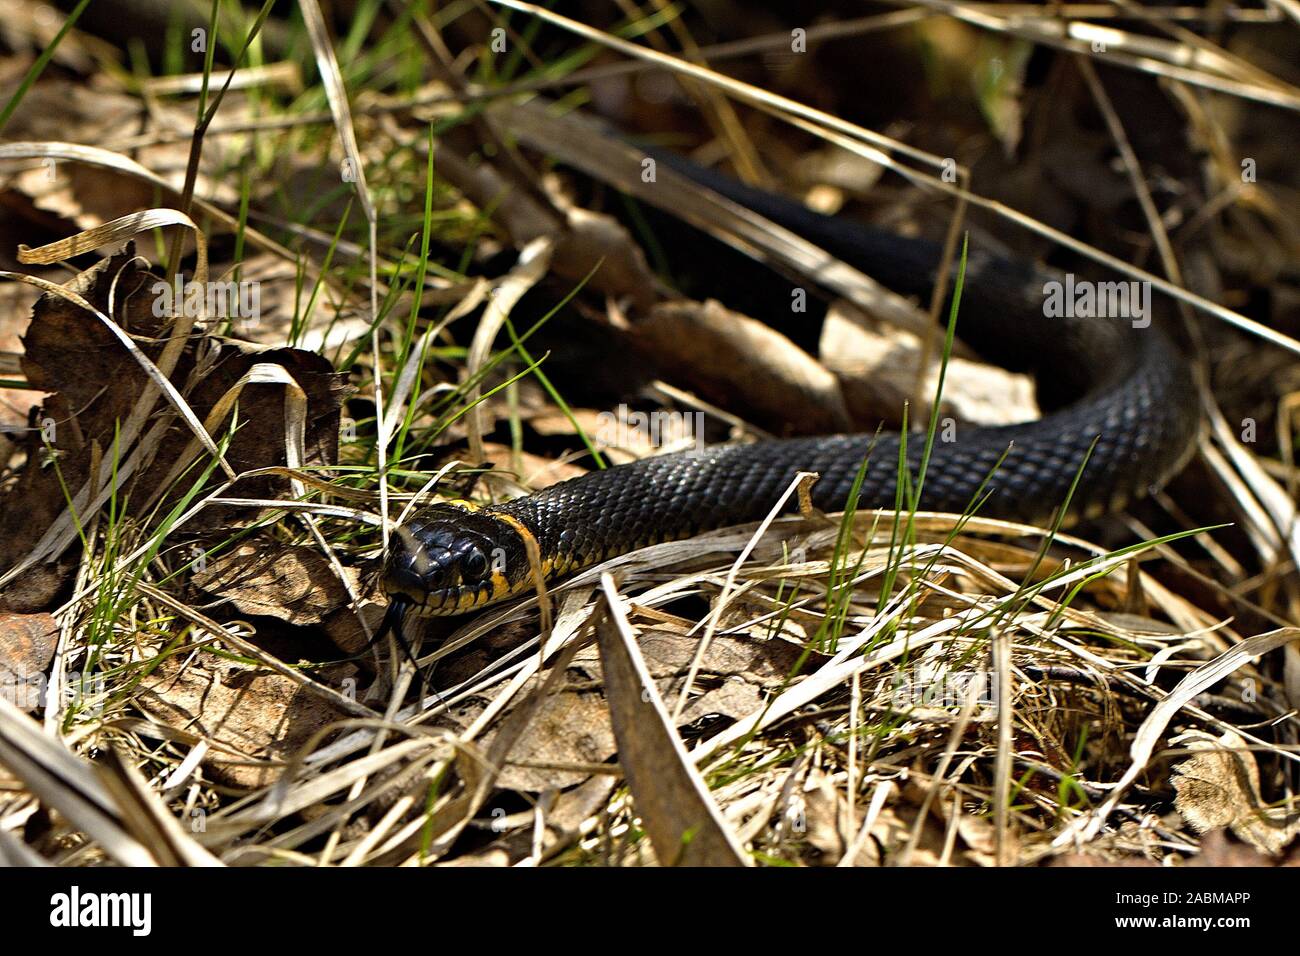 A black snake crawls on dry grass in search of food and poses for the camera. Summer. Russia. Stock Photo